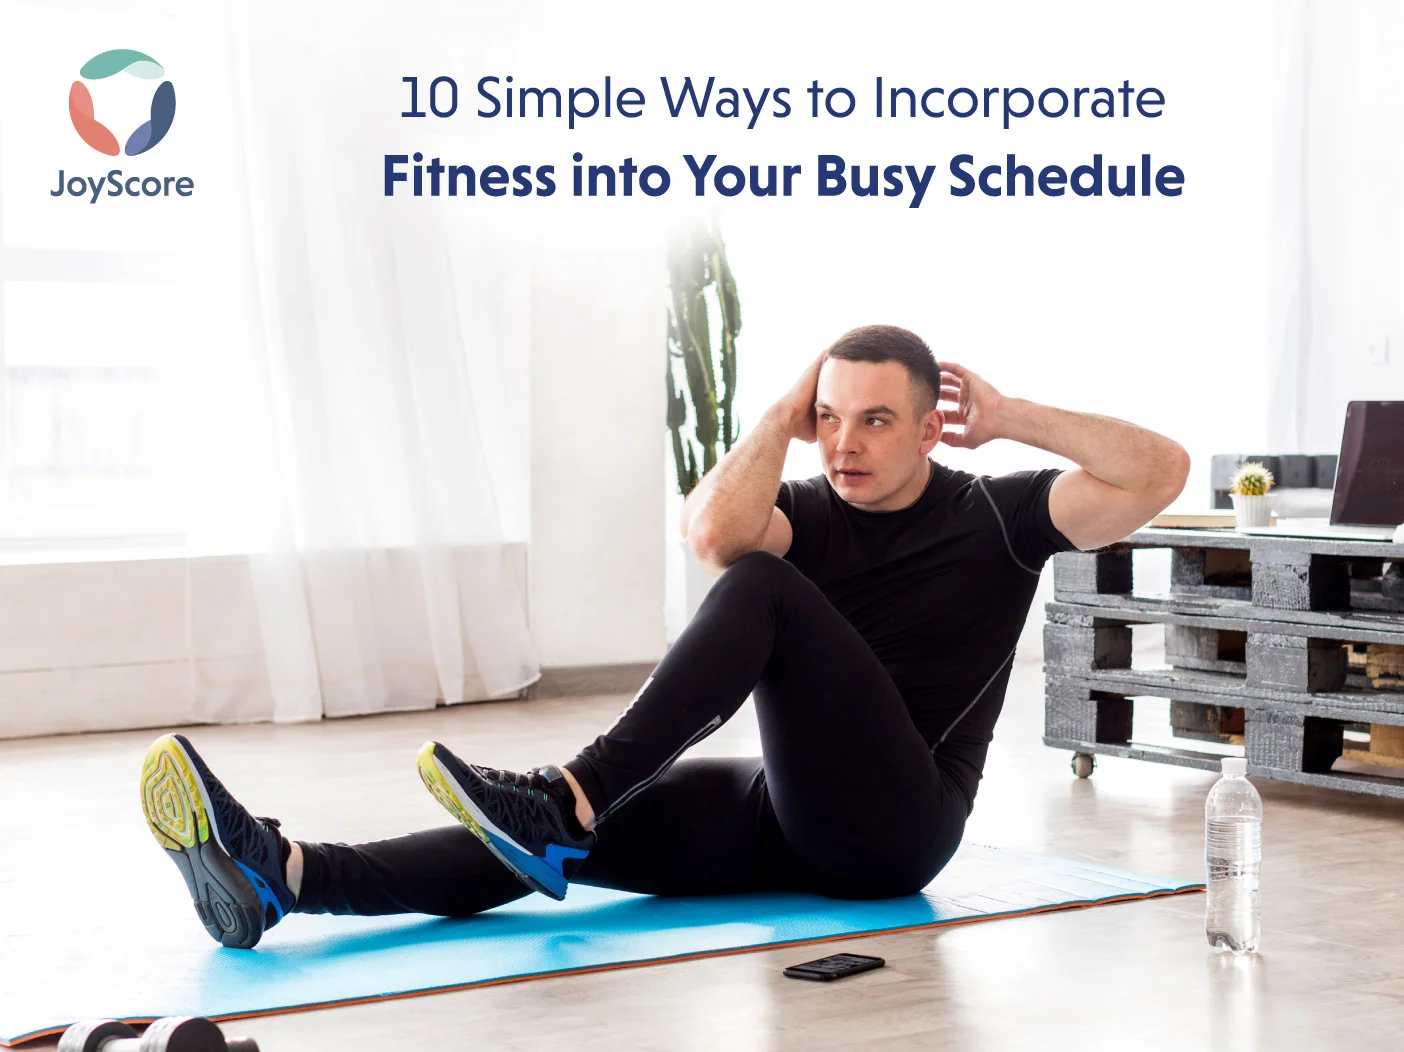 10 Simple Ways to Incorporate Fitness into Your Busy Schedule